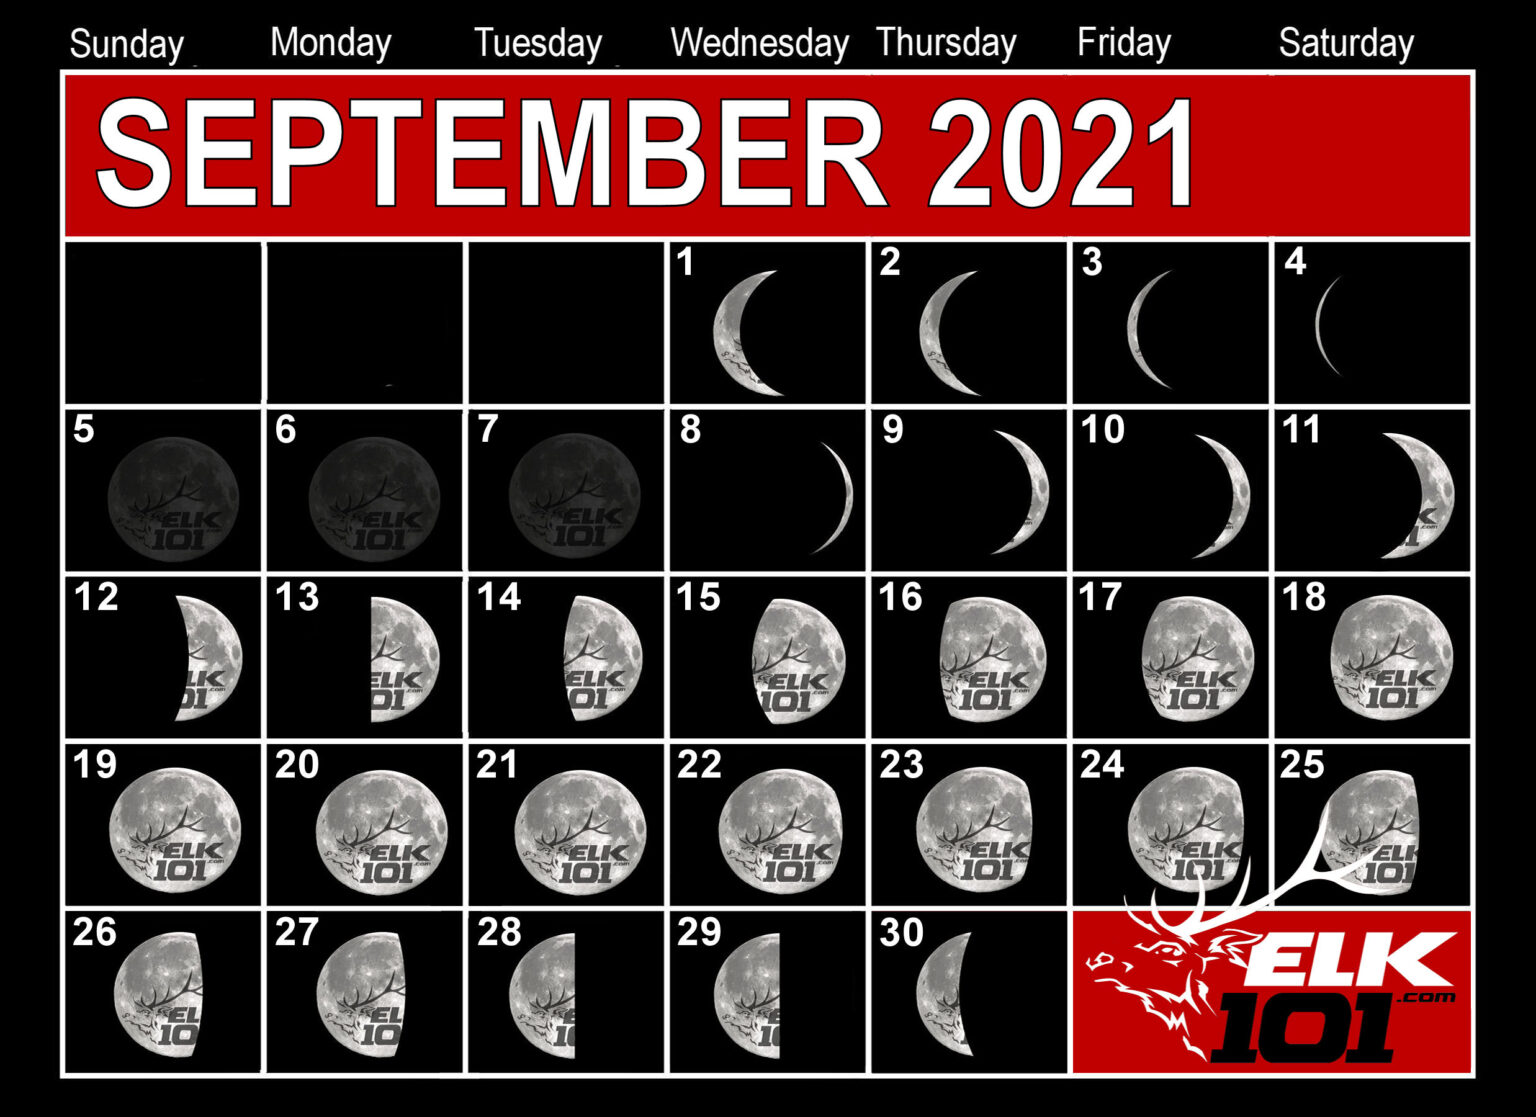 Will there be a full moon in September 2021?